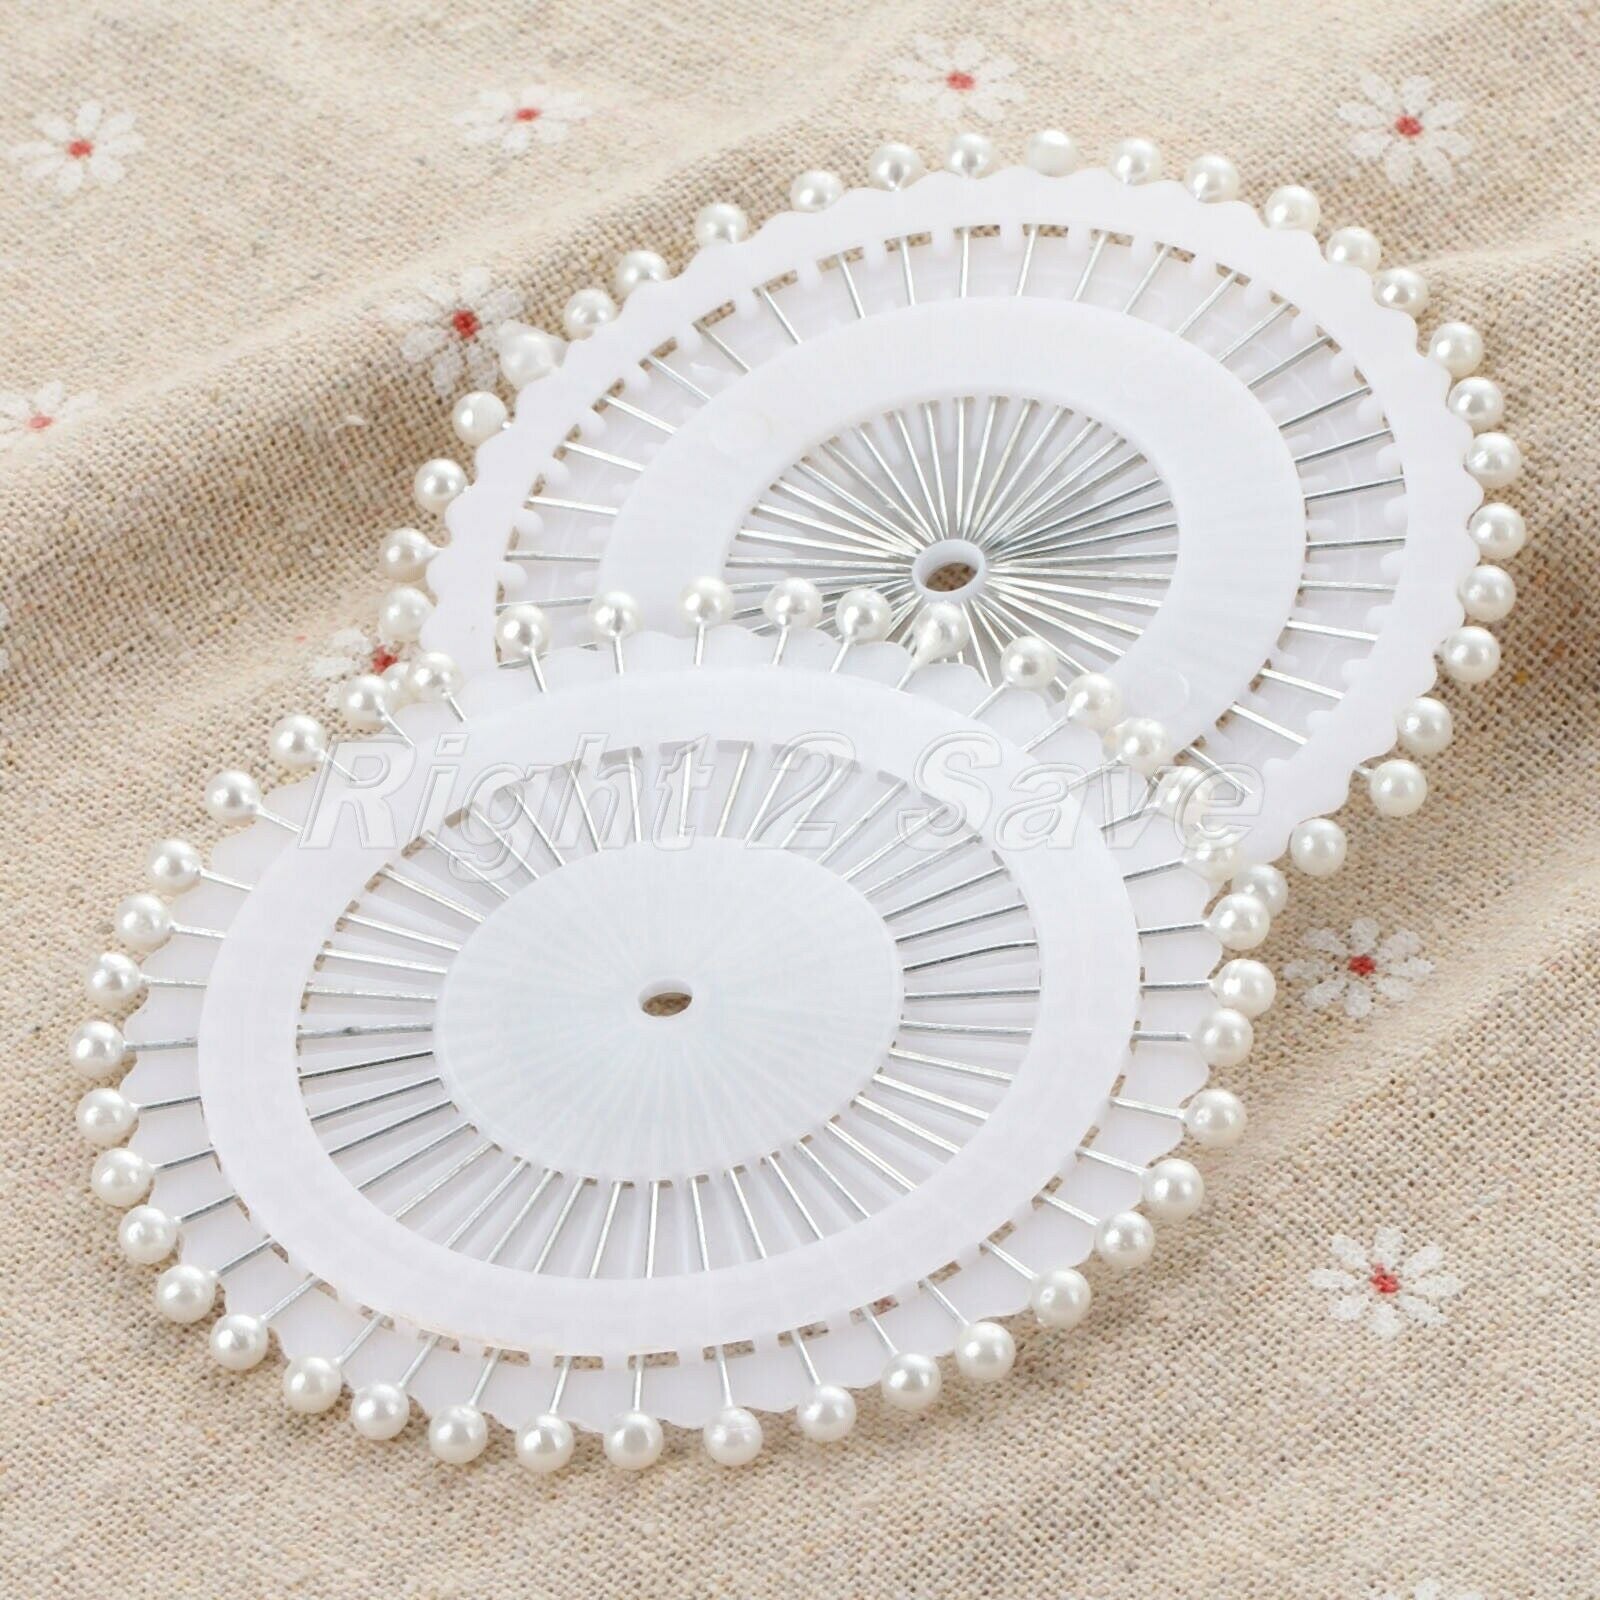 40Pcs White Round Head Dressmaking Pins Wedding Corsage Florists Sewing Tool